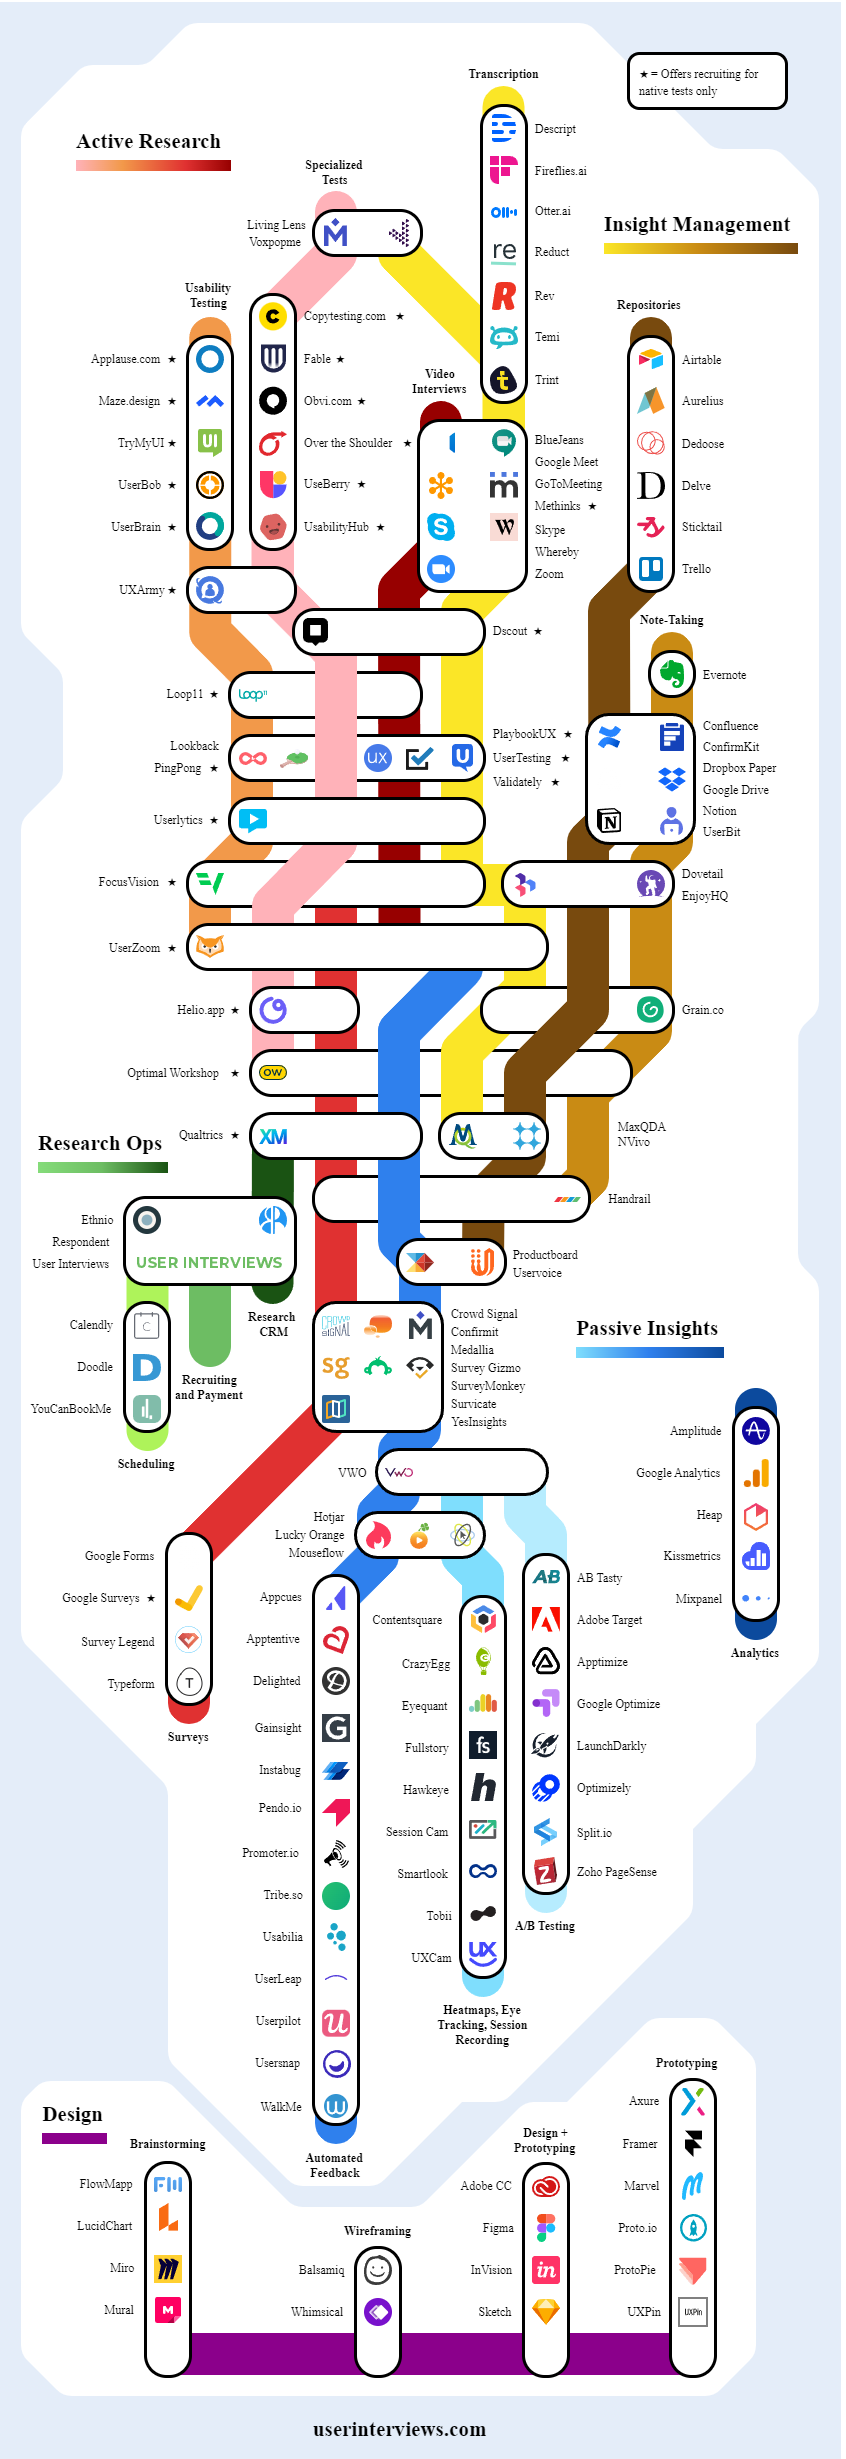 UX Research Tools Map